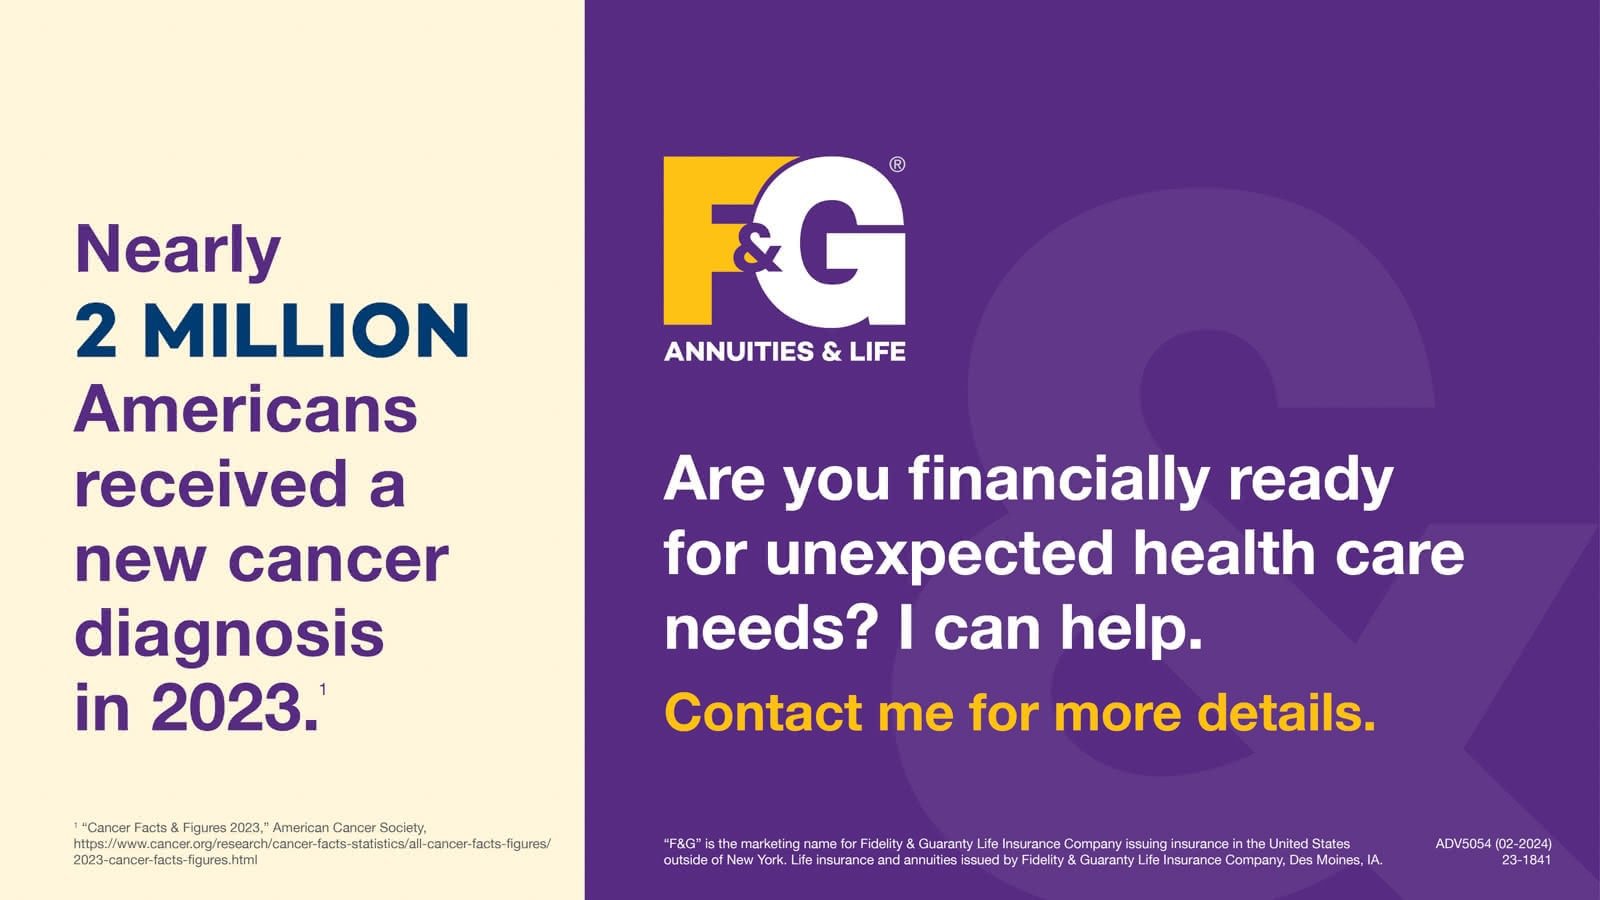 Nearly 2 million Americans received a new cancer diagnosis in 2023. 1  Are you financially ready for unexpected health care needs? I can help. Contact me for more details.